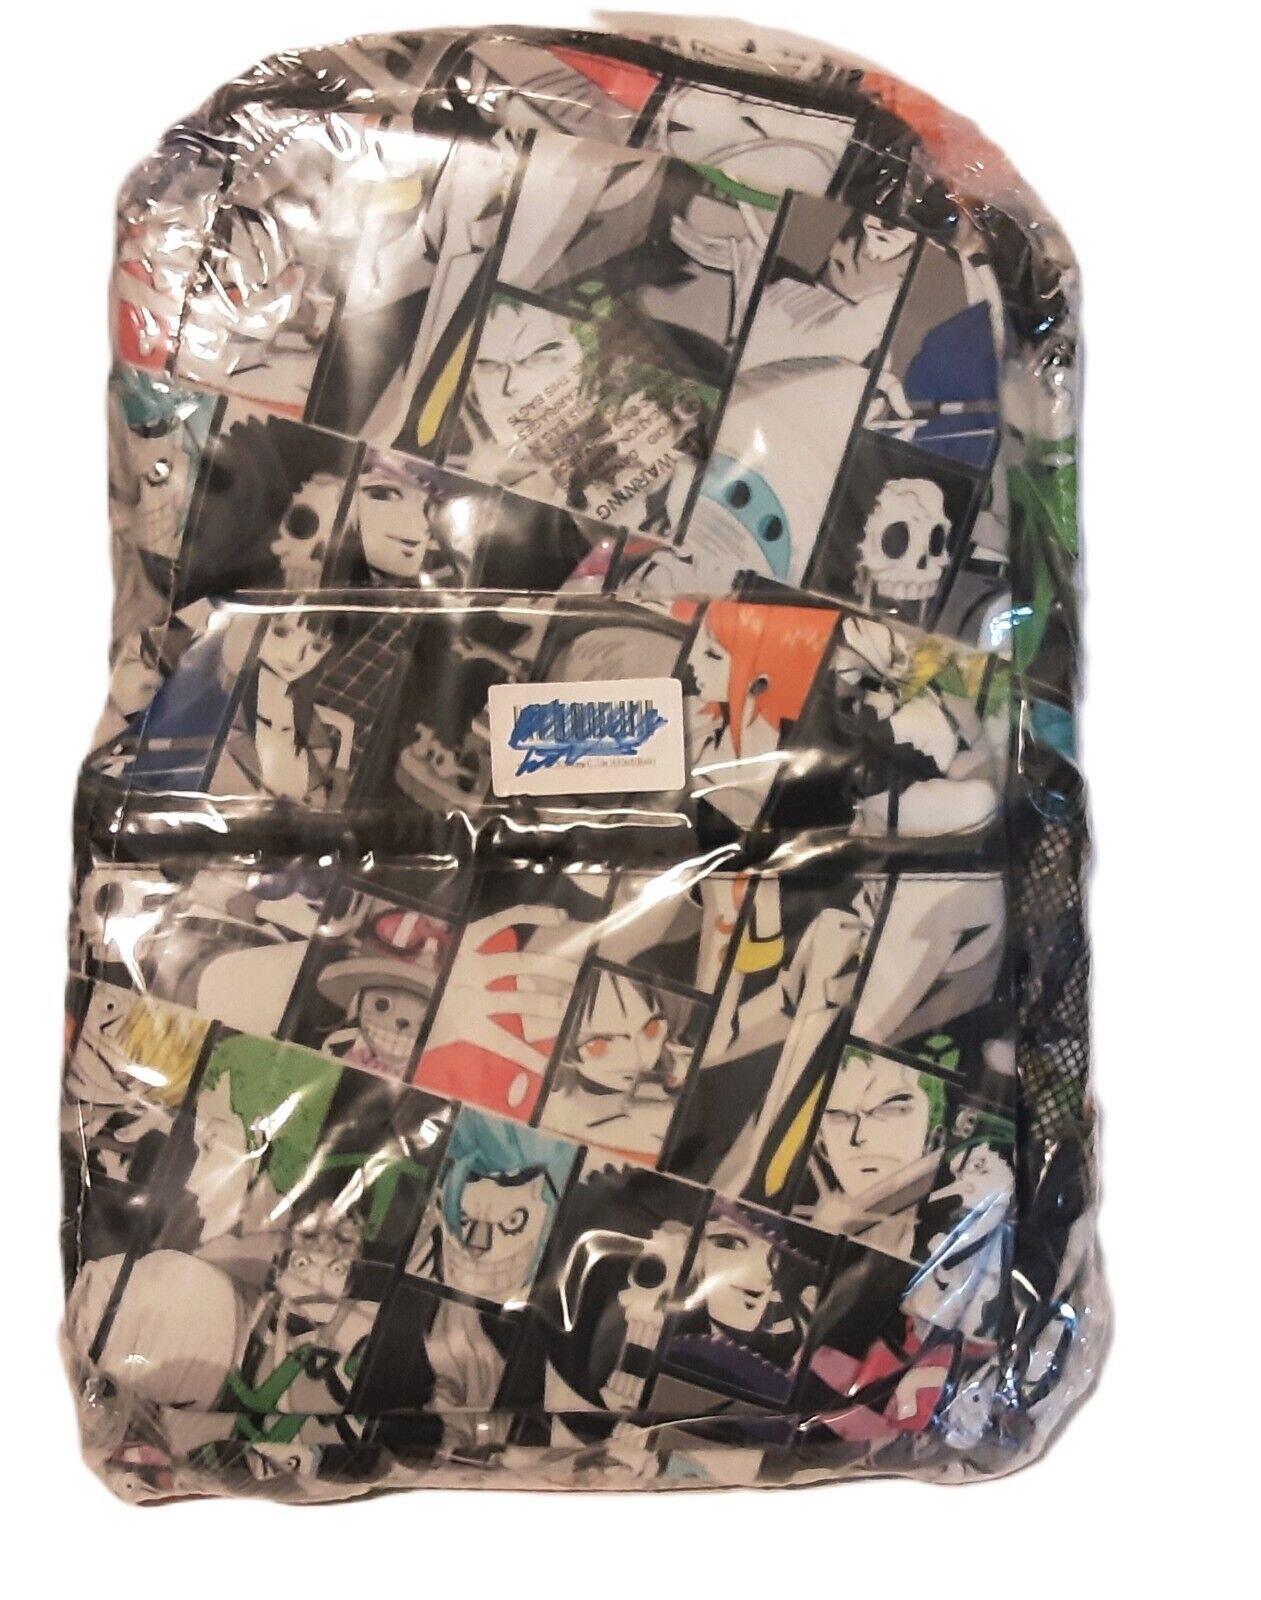 ONE PIECE CHARACTER BOOK BAG